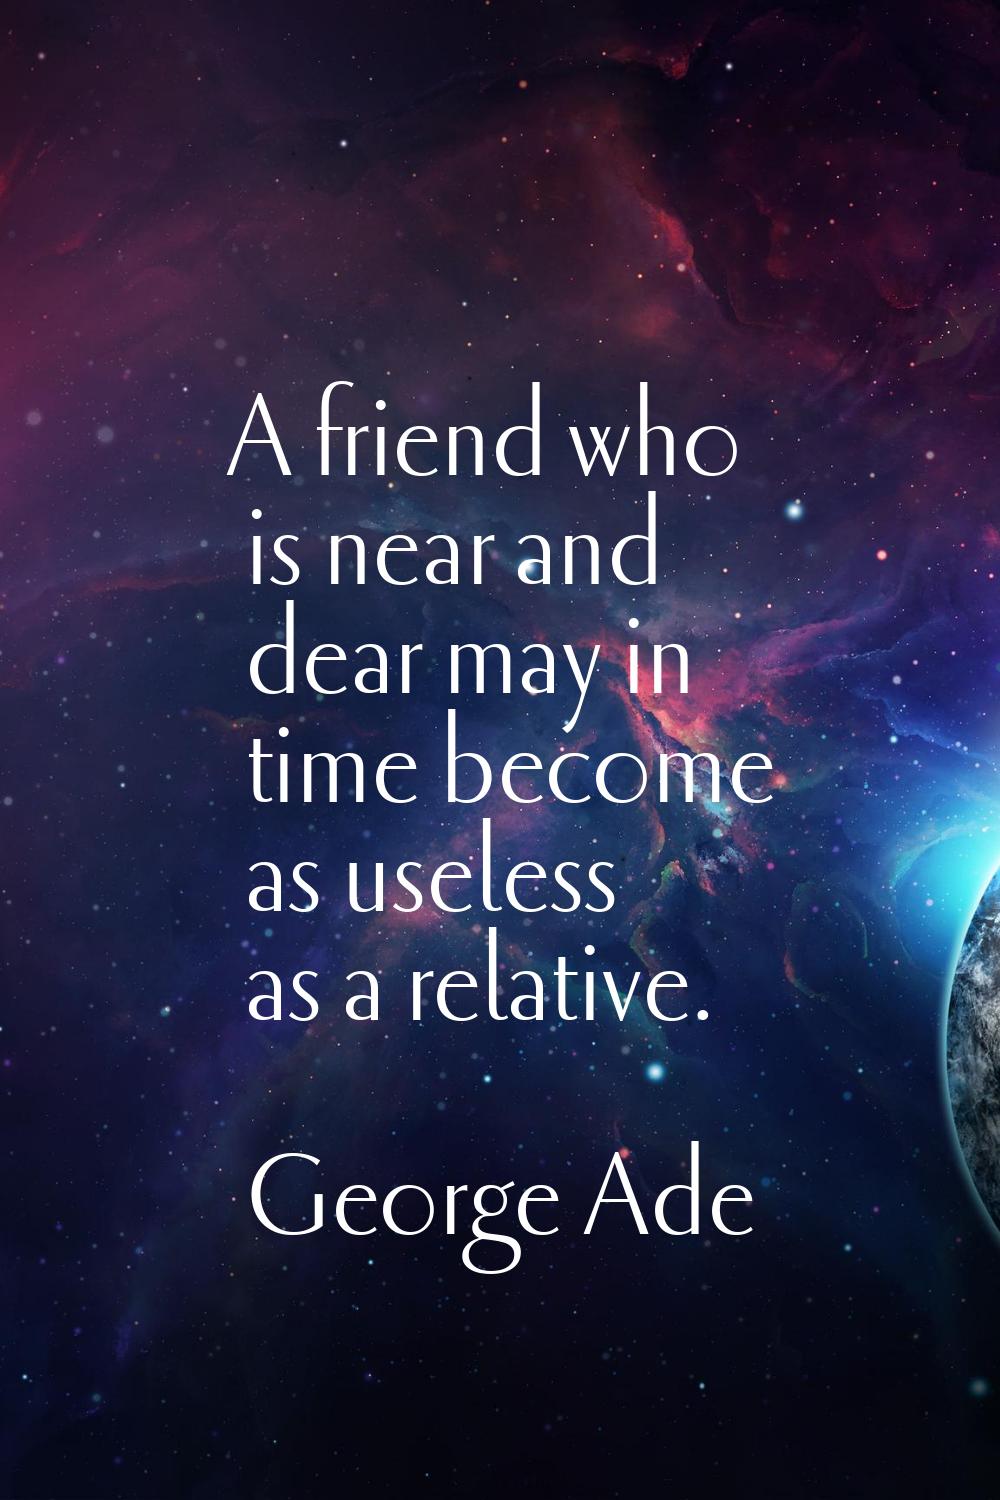 A friend who is near and dear may in time become as useless as a relative.